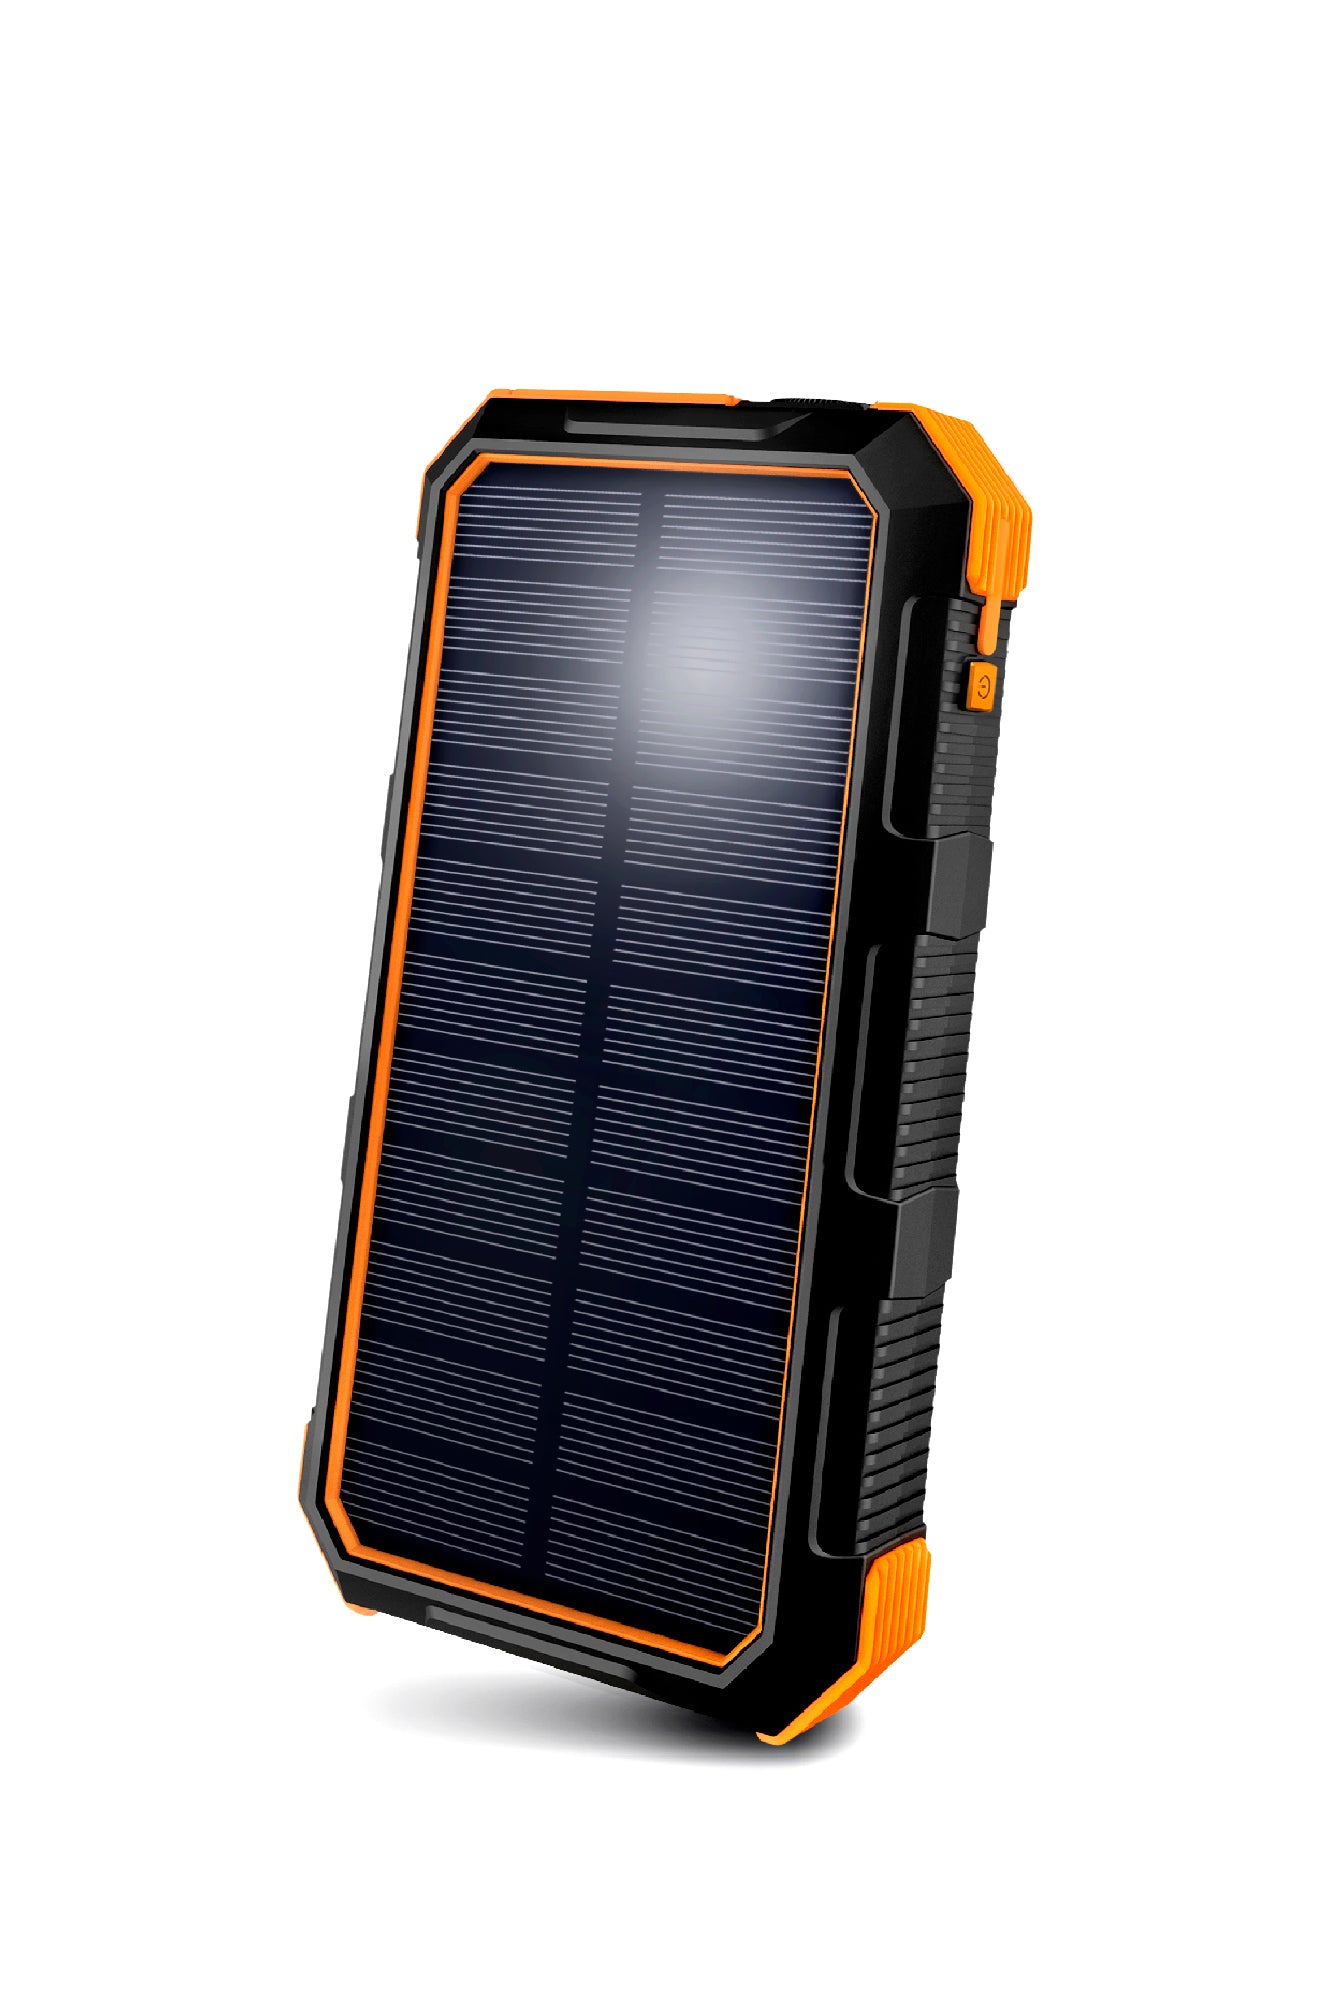 ROC24 24,000 mAh Solar Powerbank with Power Delivery Fast Charging